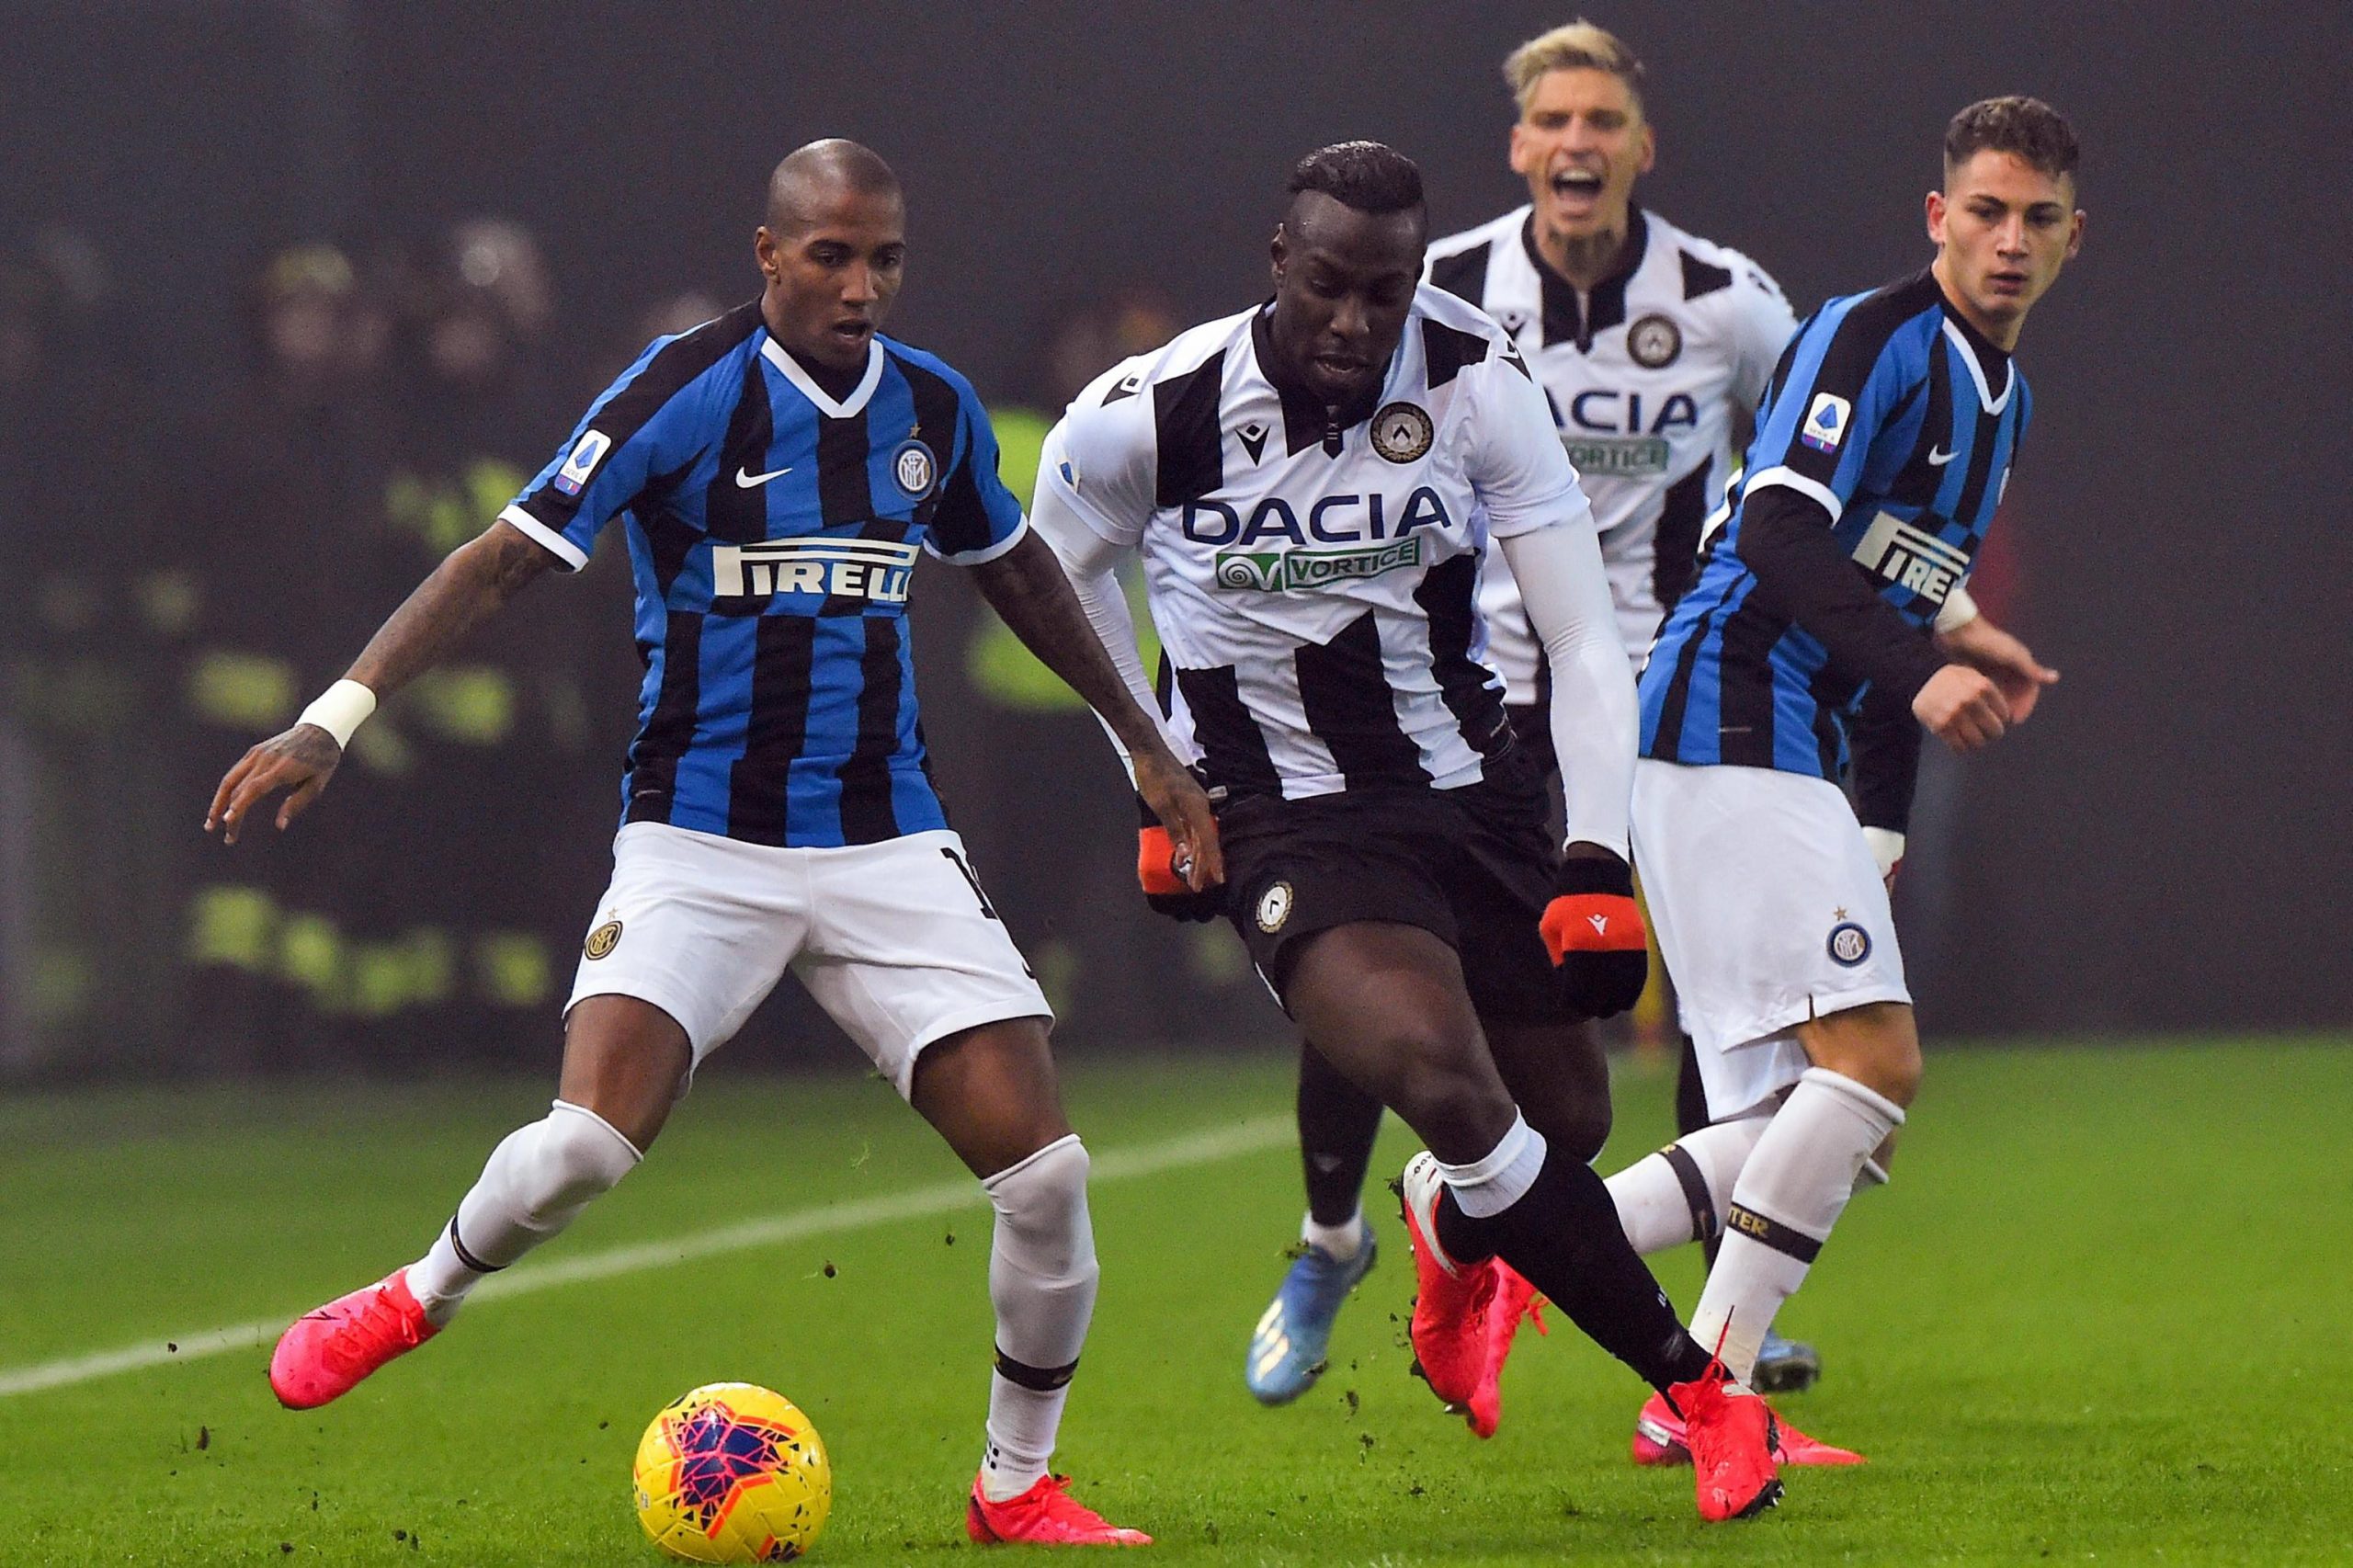 epa08188920 Inter's Ashley Young (L) fights for the ball with Udinese's Stefano Okaka (C) during the Italian Serie A soccer match Udinese Calcio vs FC Inter at the Friuli - Dacia Arena stadium in Udine, Italy, 02 February 2020.  EPA/FRANCO DEBERNARDI